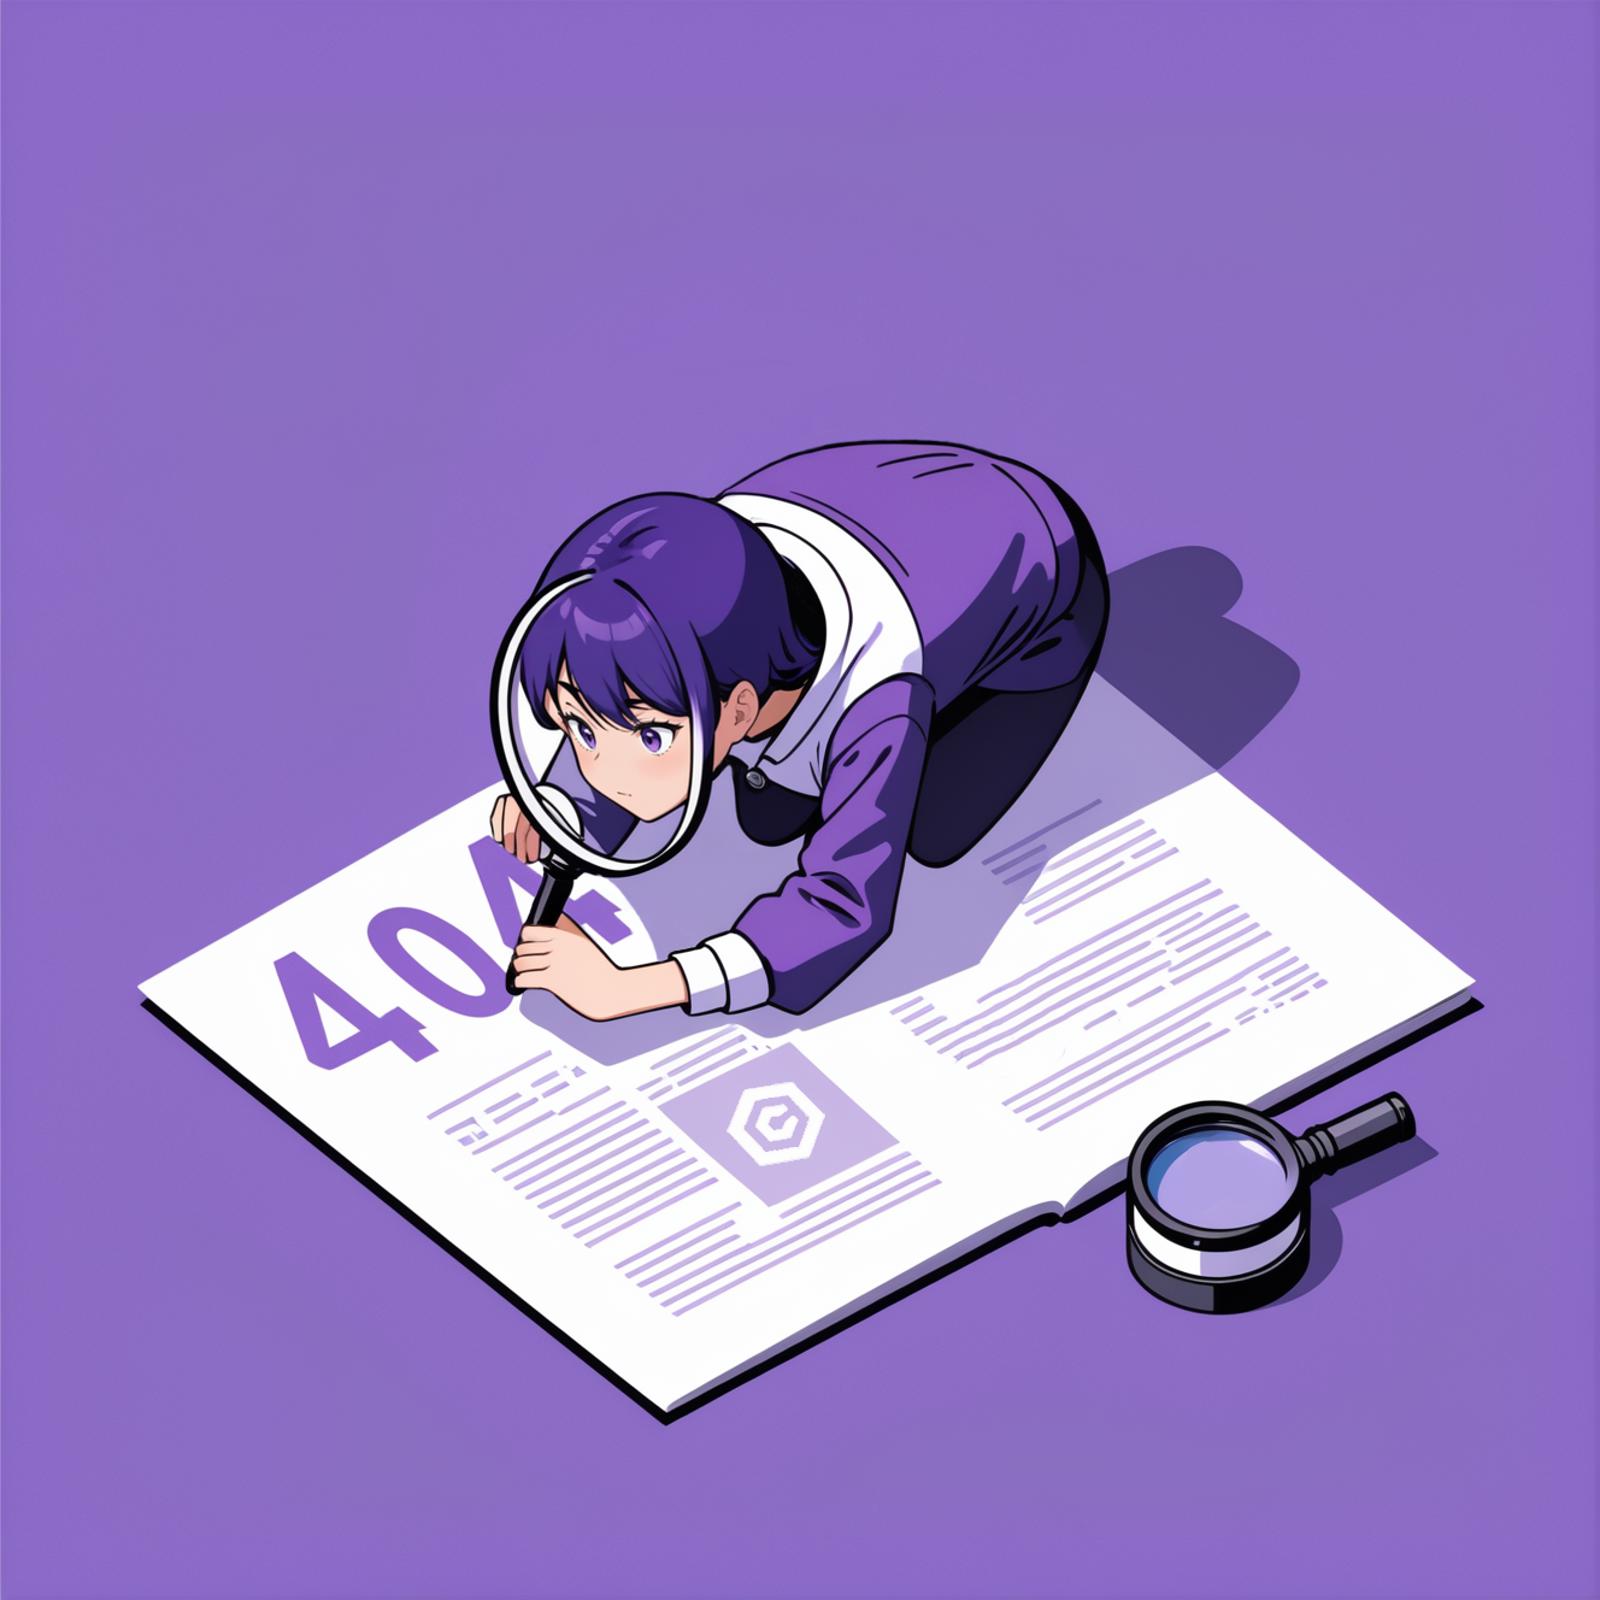 A 404 error girl with a magnifying glass.